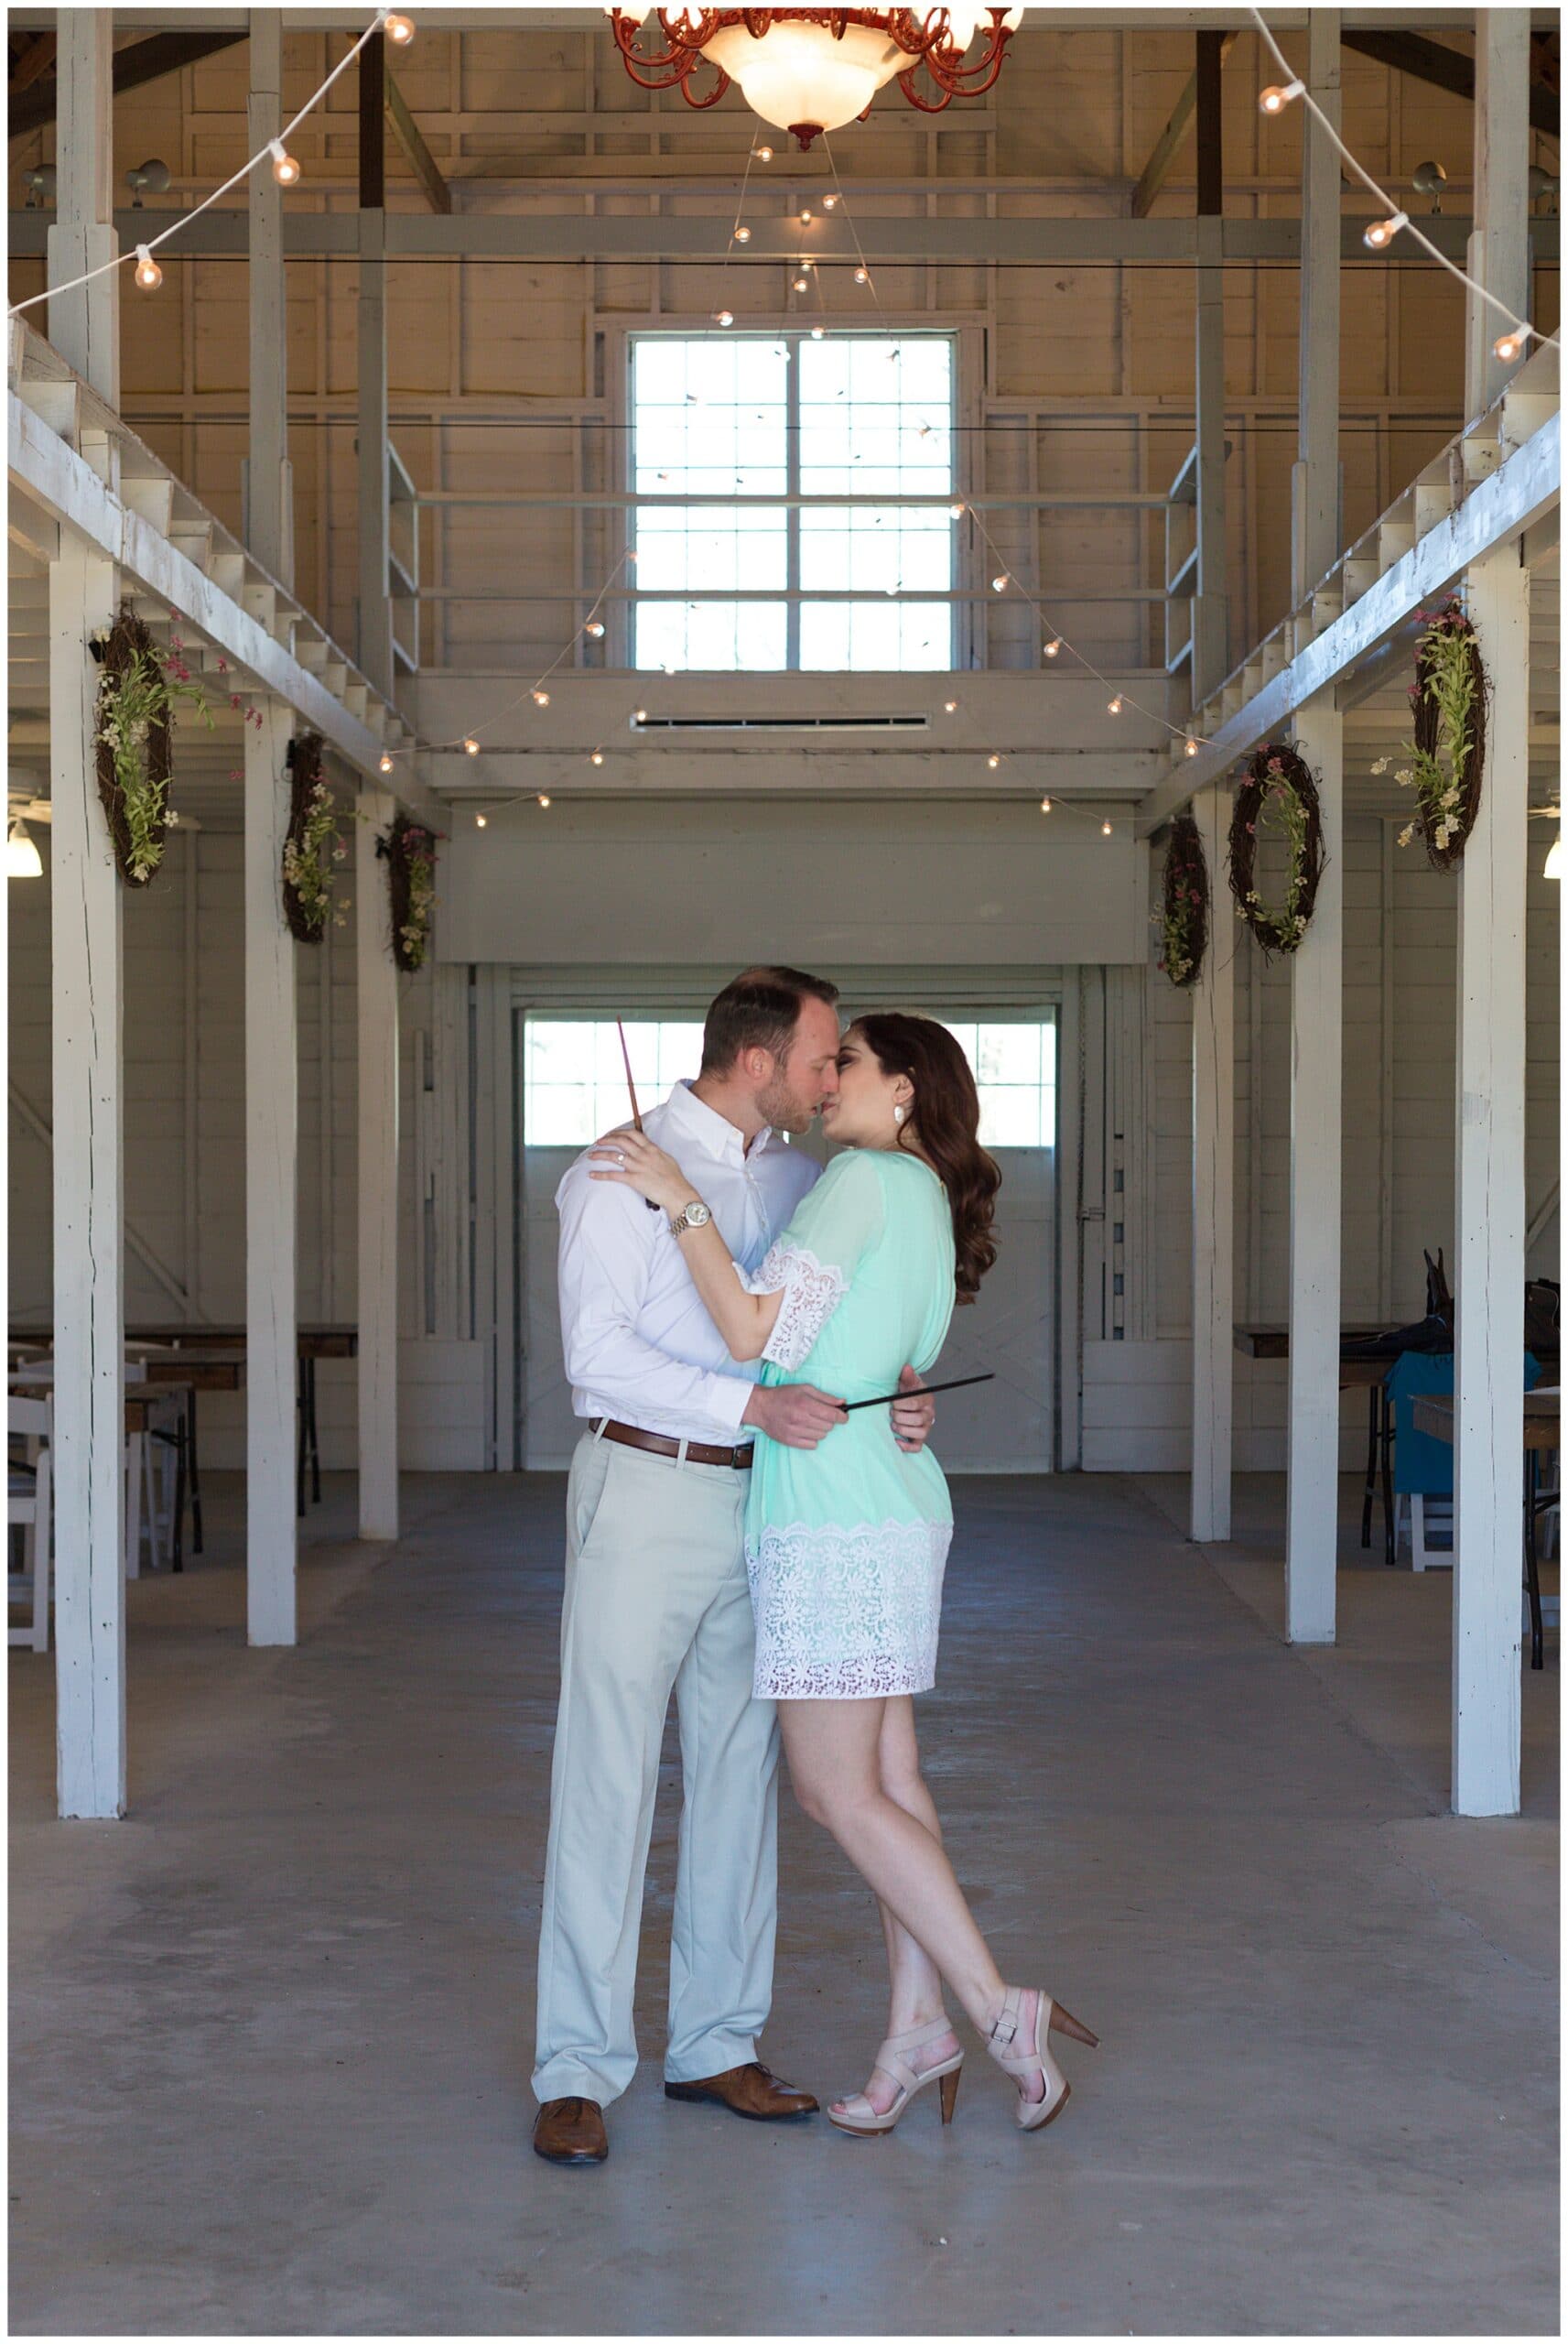 Magical engagements session at the Grand Texana in Houston, Texas photographed by Swish and Click Photography